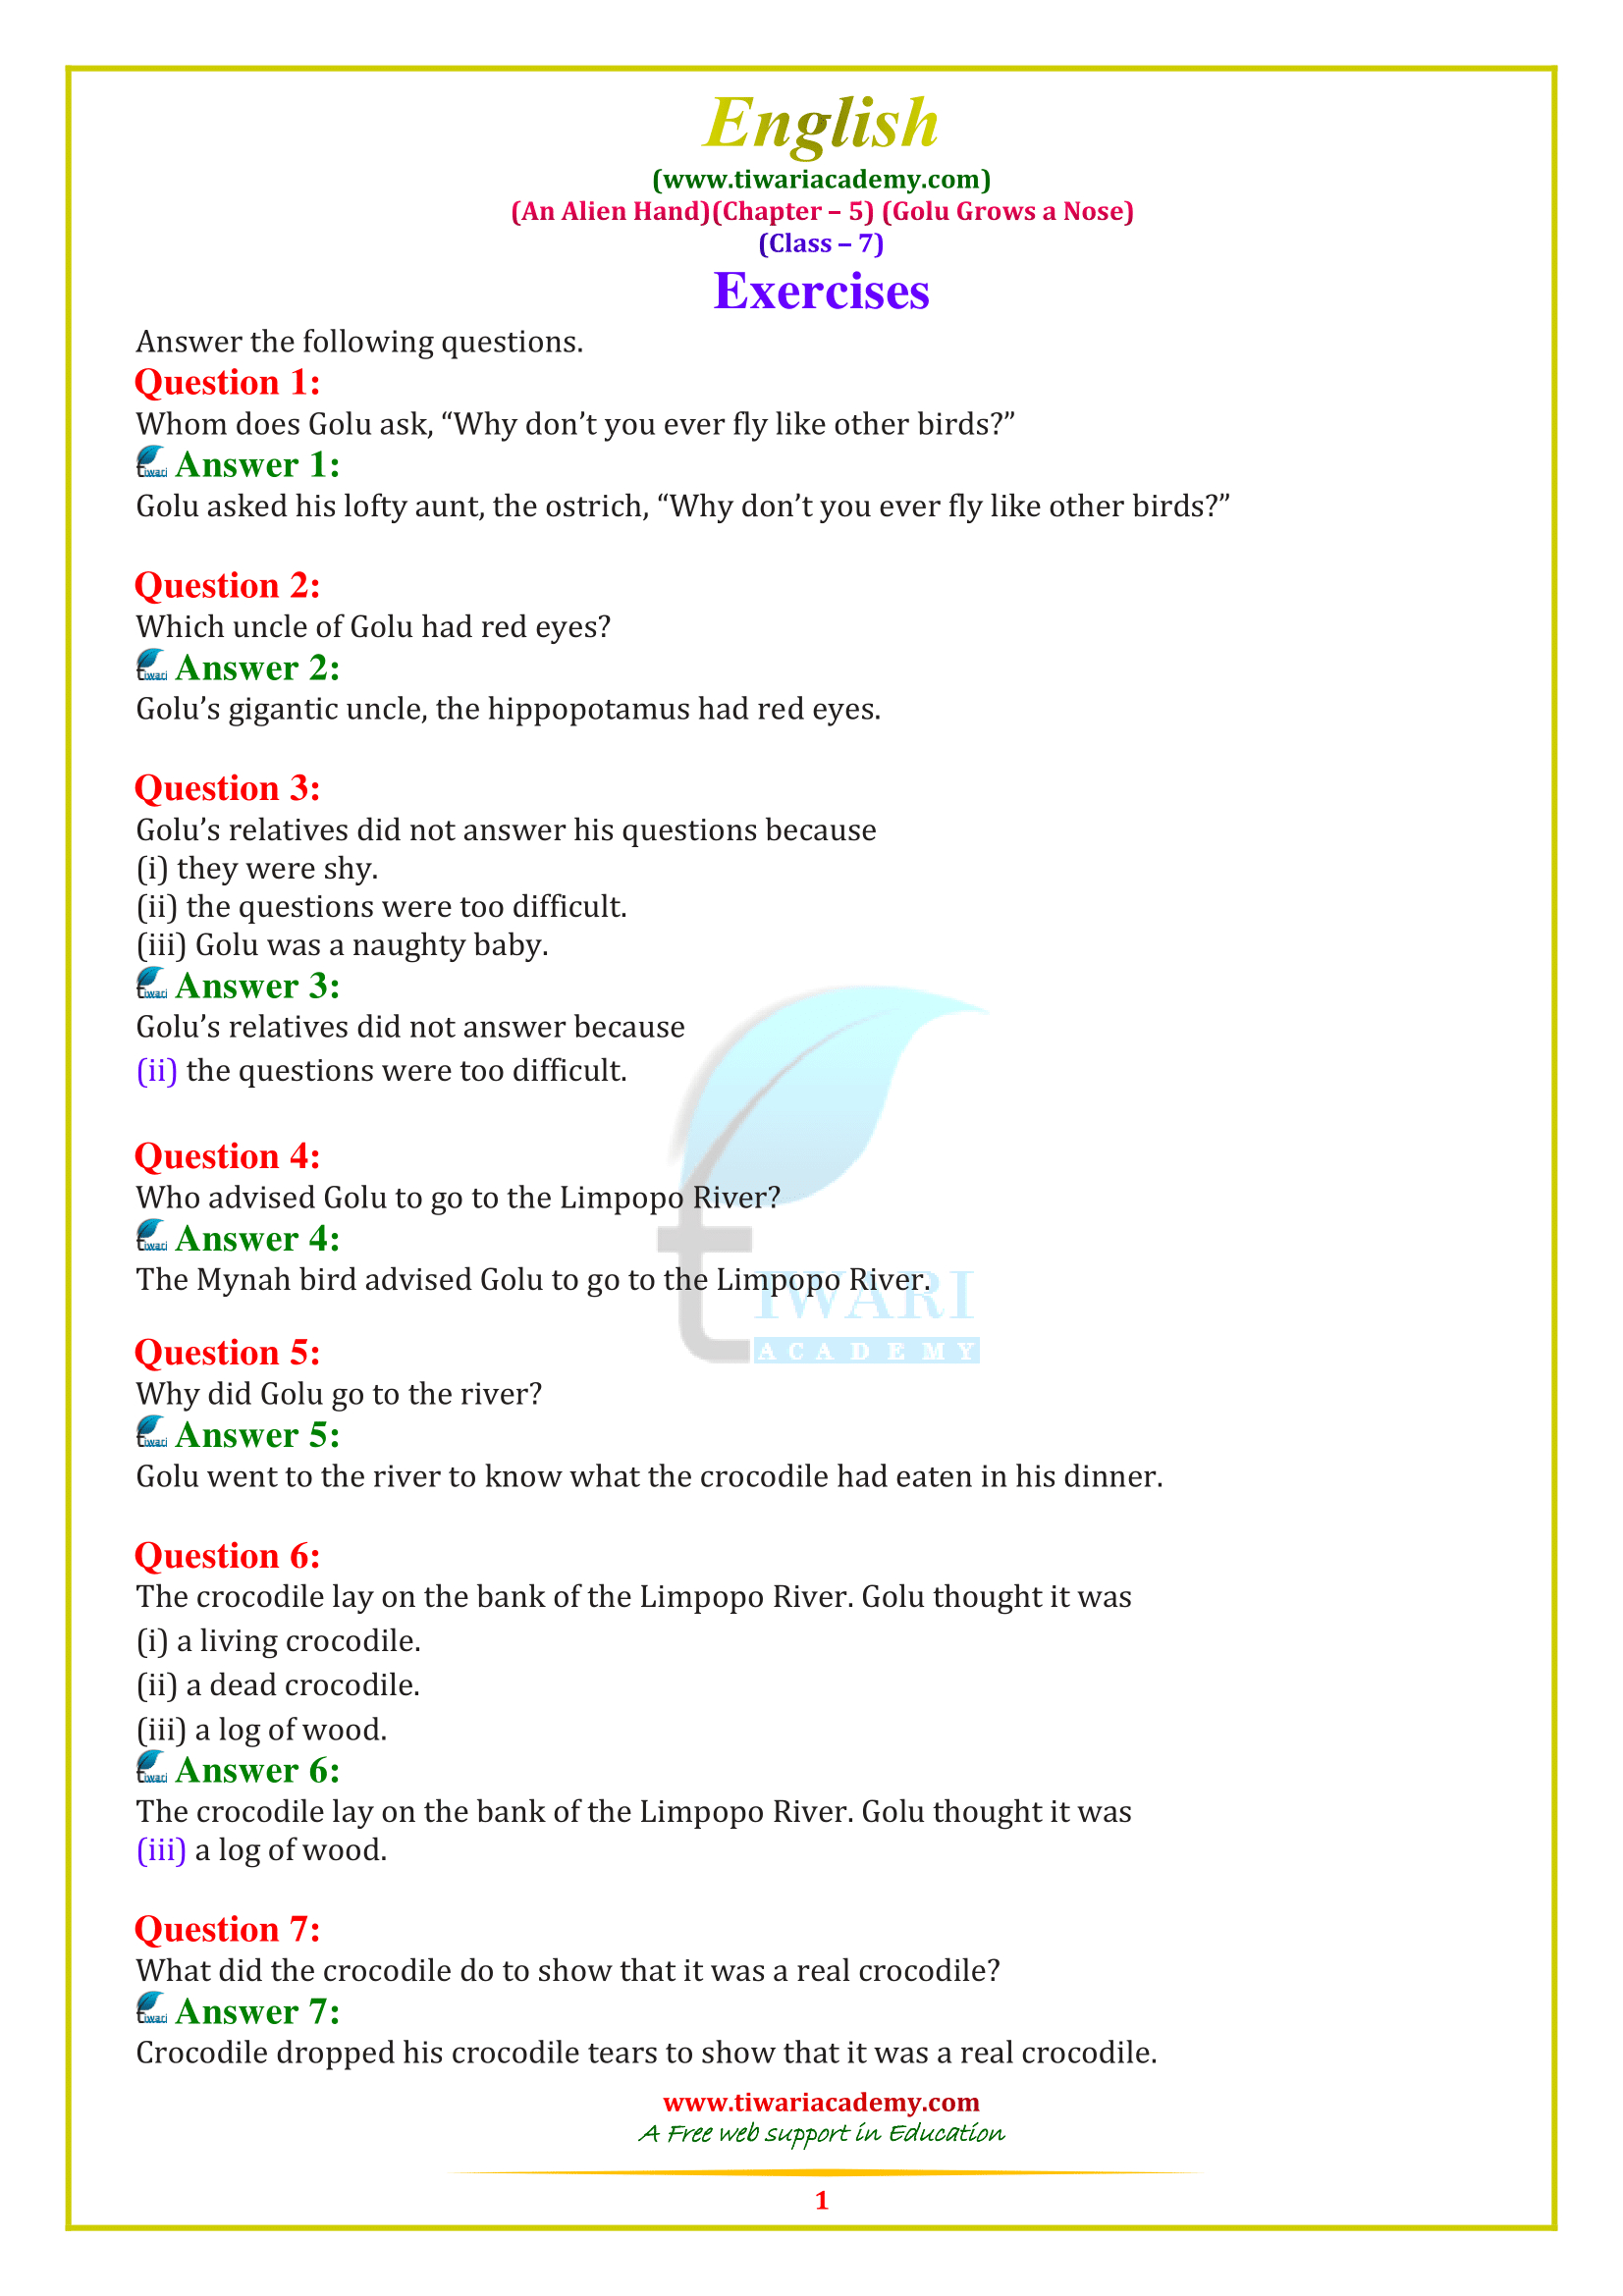 Class 7 English Chapter 5: Golu Grows a Nose - Answers